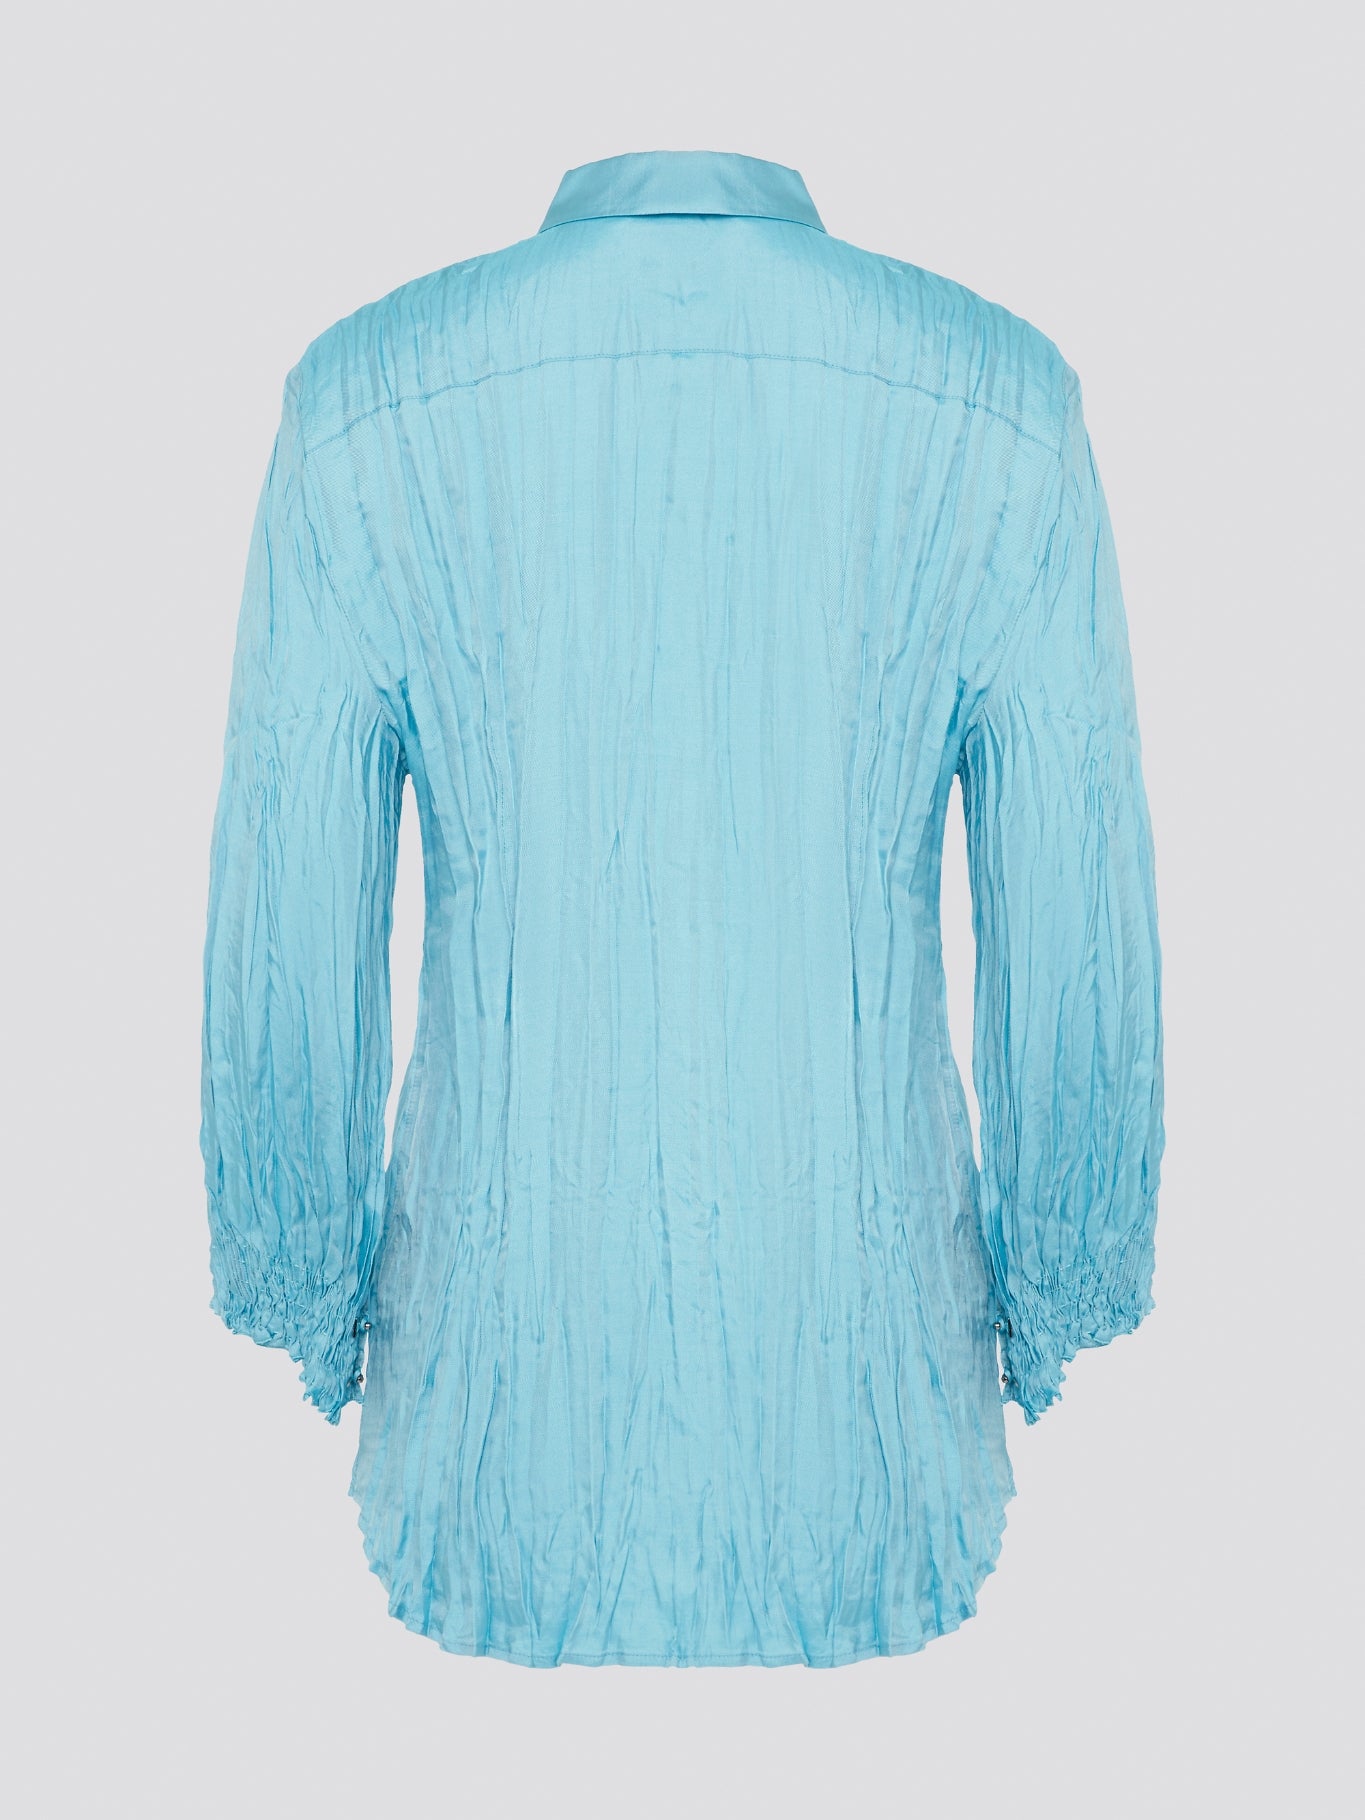 Elevate your wardrobe with the stunning Blue Crinkled Shirt from Roberto Cavalli. Crafted with meticulous attention to detail, this shirt features a unique crinkled texture that adds depth and dimension to any outfit. Whether you're dressing it up for a night out or keeping it casual for a day at the office, this shirt is sure to turn heads and make a statement.